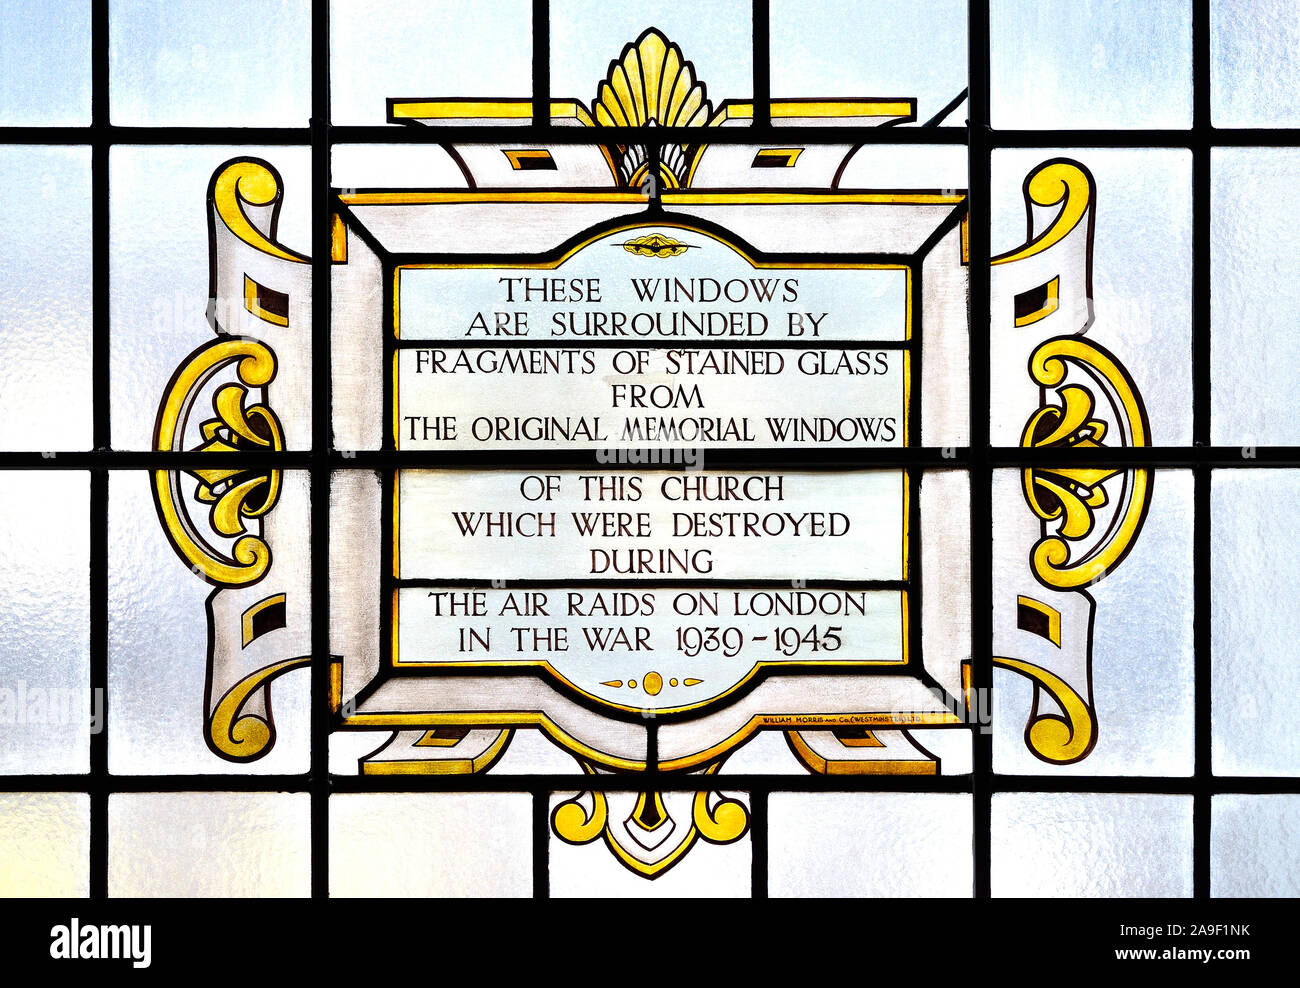 London, UK. St Marylebone Parish Church, Marylebone Road. Stained glass window: window explaining that others have been put together from fragments of Stock Photo